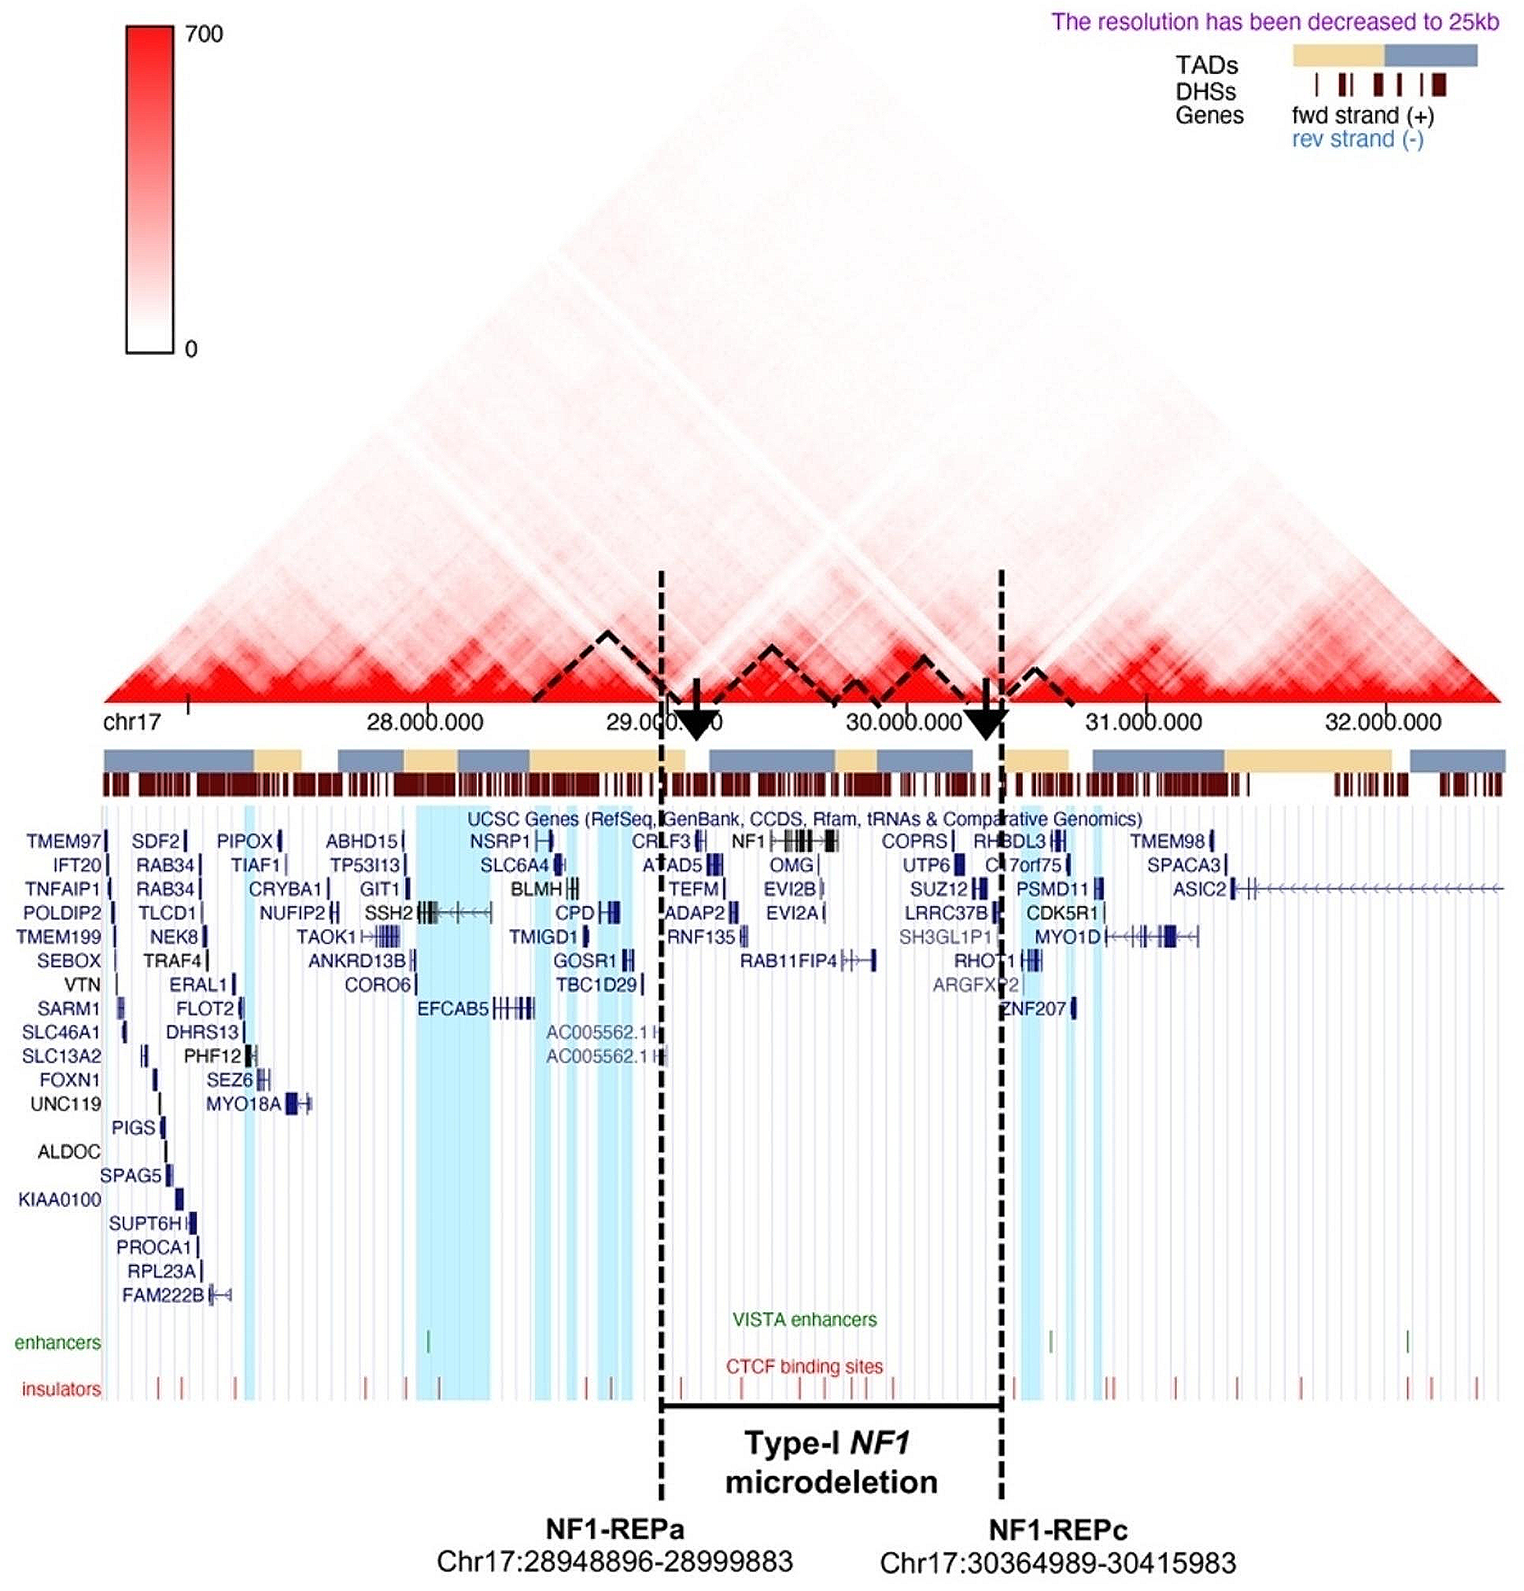 Genetic/epigenetic effects in NF1 microdeletion syndrome: beyond the haploinsufficiency, looking at the contribution of not deleted genes